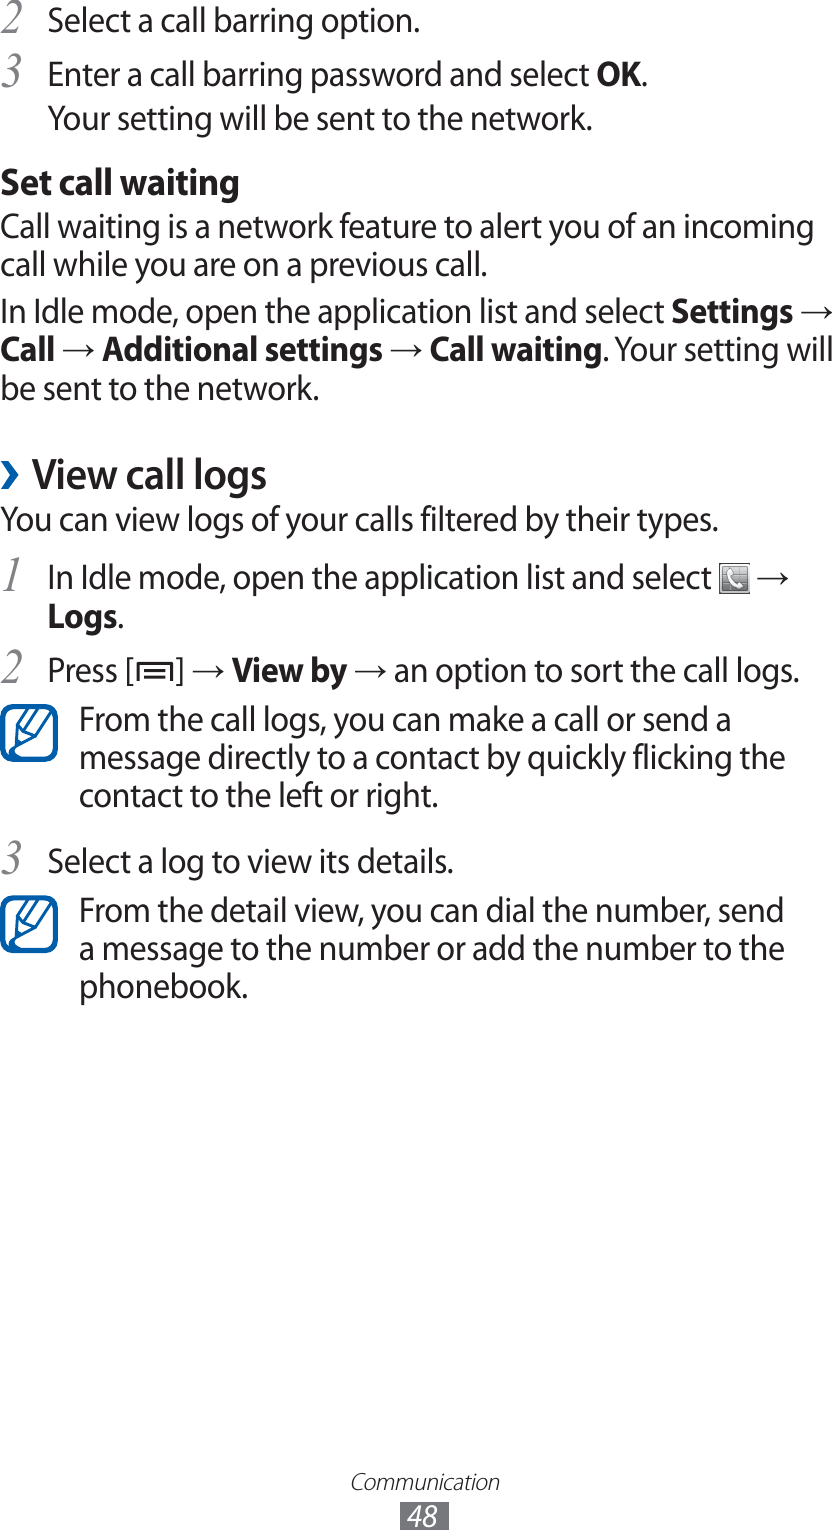 Communication48Select a call barring option.2 Enter a call barring password and select 3 OK.Your setting will be sent to the network.Set call waitingCall waiting is a network feature to alert you of an incoming call while you are on a previous call.In Idle mode, open the application list and select Settings → Call → Additional settings → Call waiting. Your setting will be sent to the network.View call logs ›You can view logs of your calls filtered by their types.In Idle mode, open the application list and select 1  → Logs.Press [2 ] → View by → an option to sort the call logs.From the call logs, you can make a call or send a message directly to a contact by quickly flicking the contact to the left or right.Select a log to view its details.3 From the detail view, you can dial the number, send a message to the number or add the number to the phonebook.